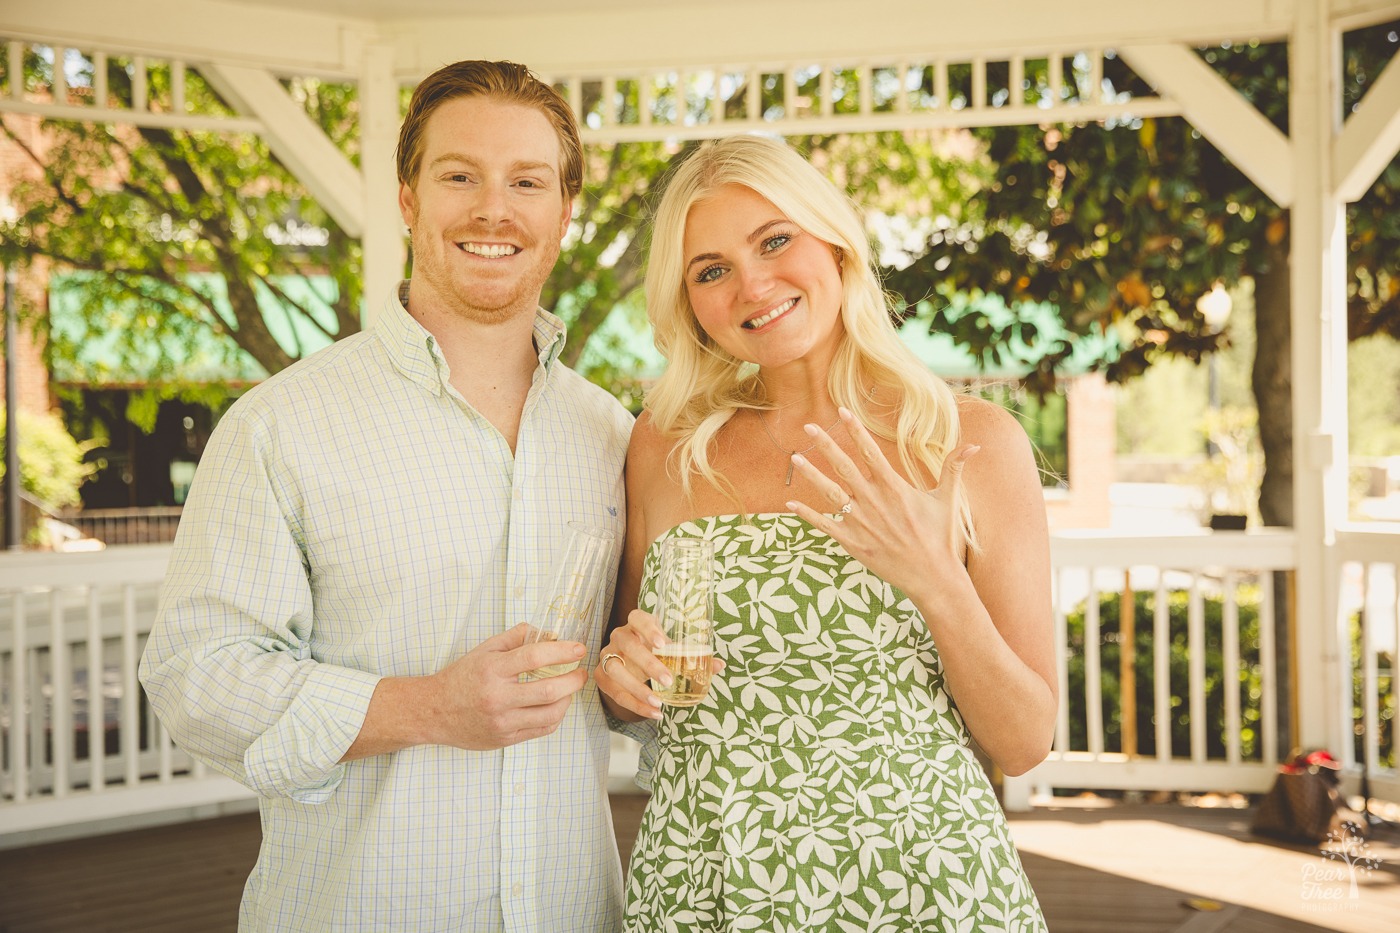 Newly engaged couple with the beautiful blond woman showing off her new ring